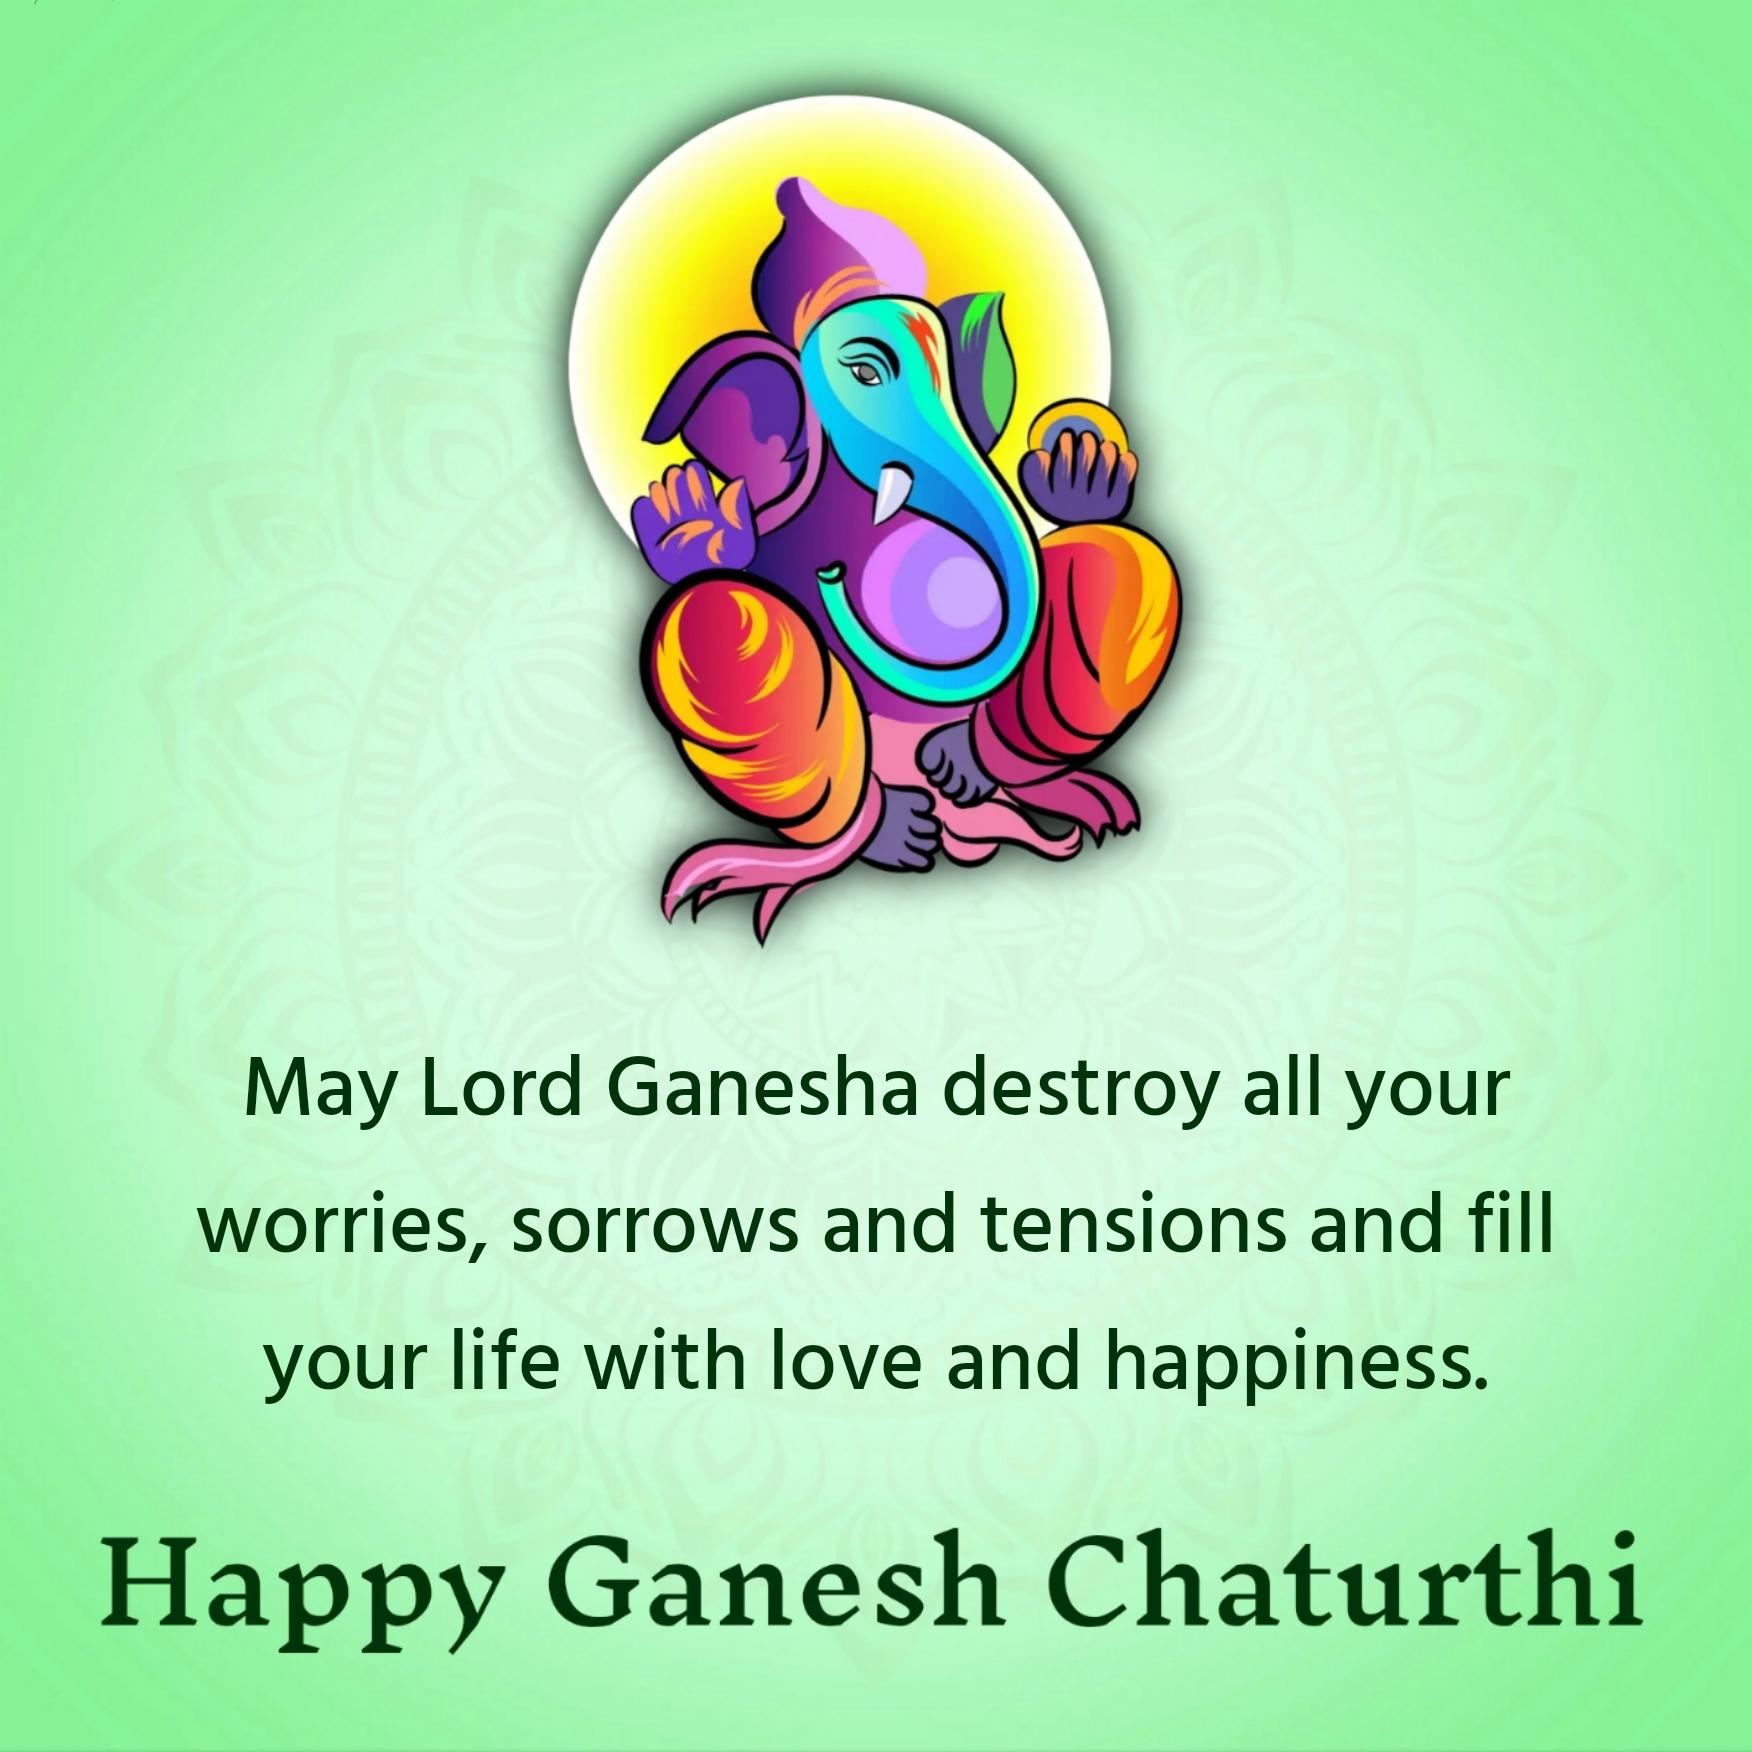 May Lord Ganesha destroy all your worries sorrows